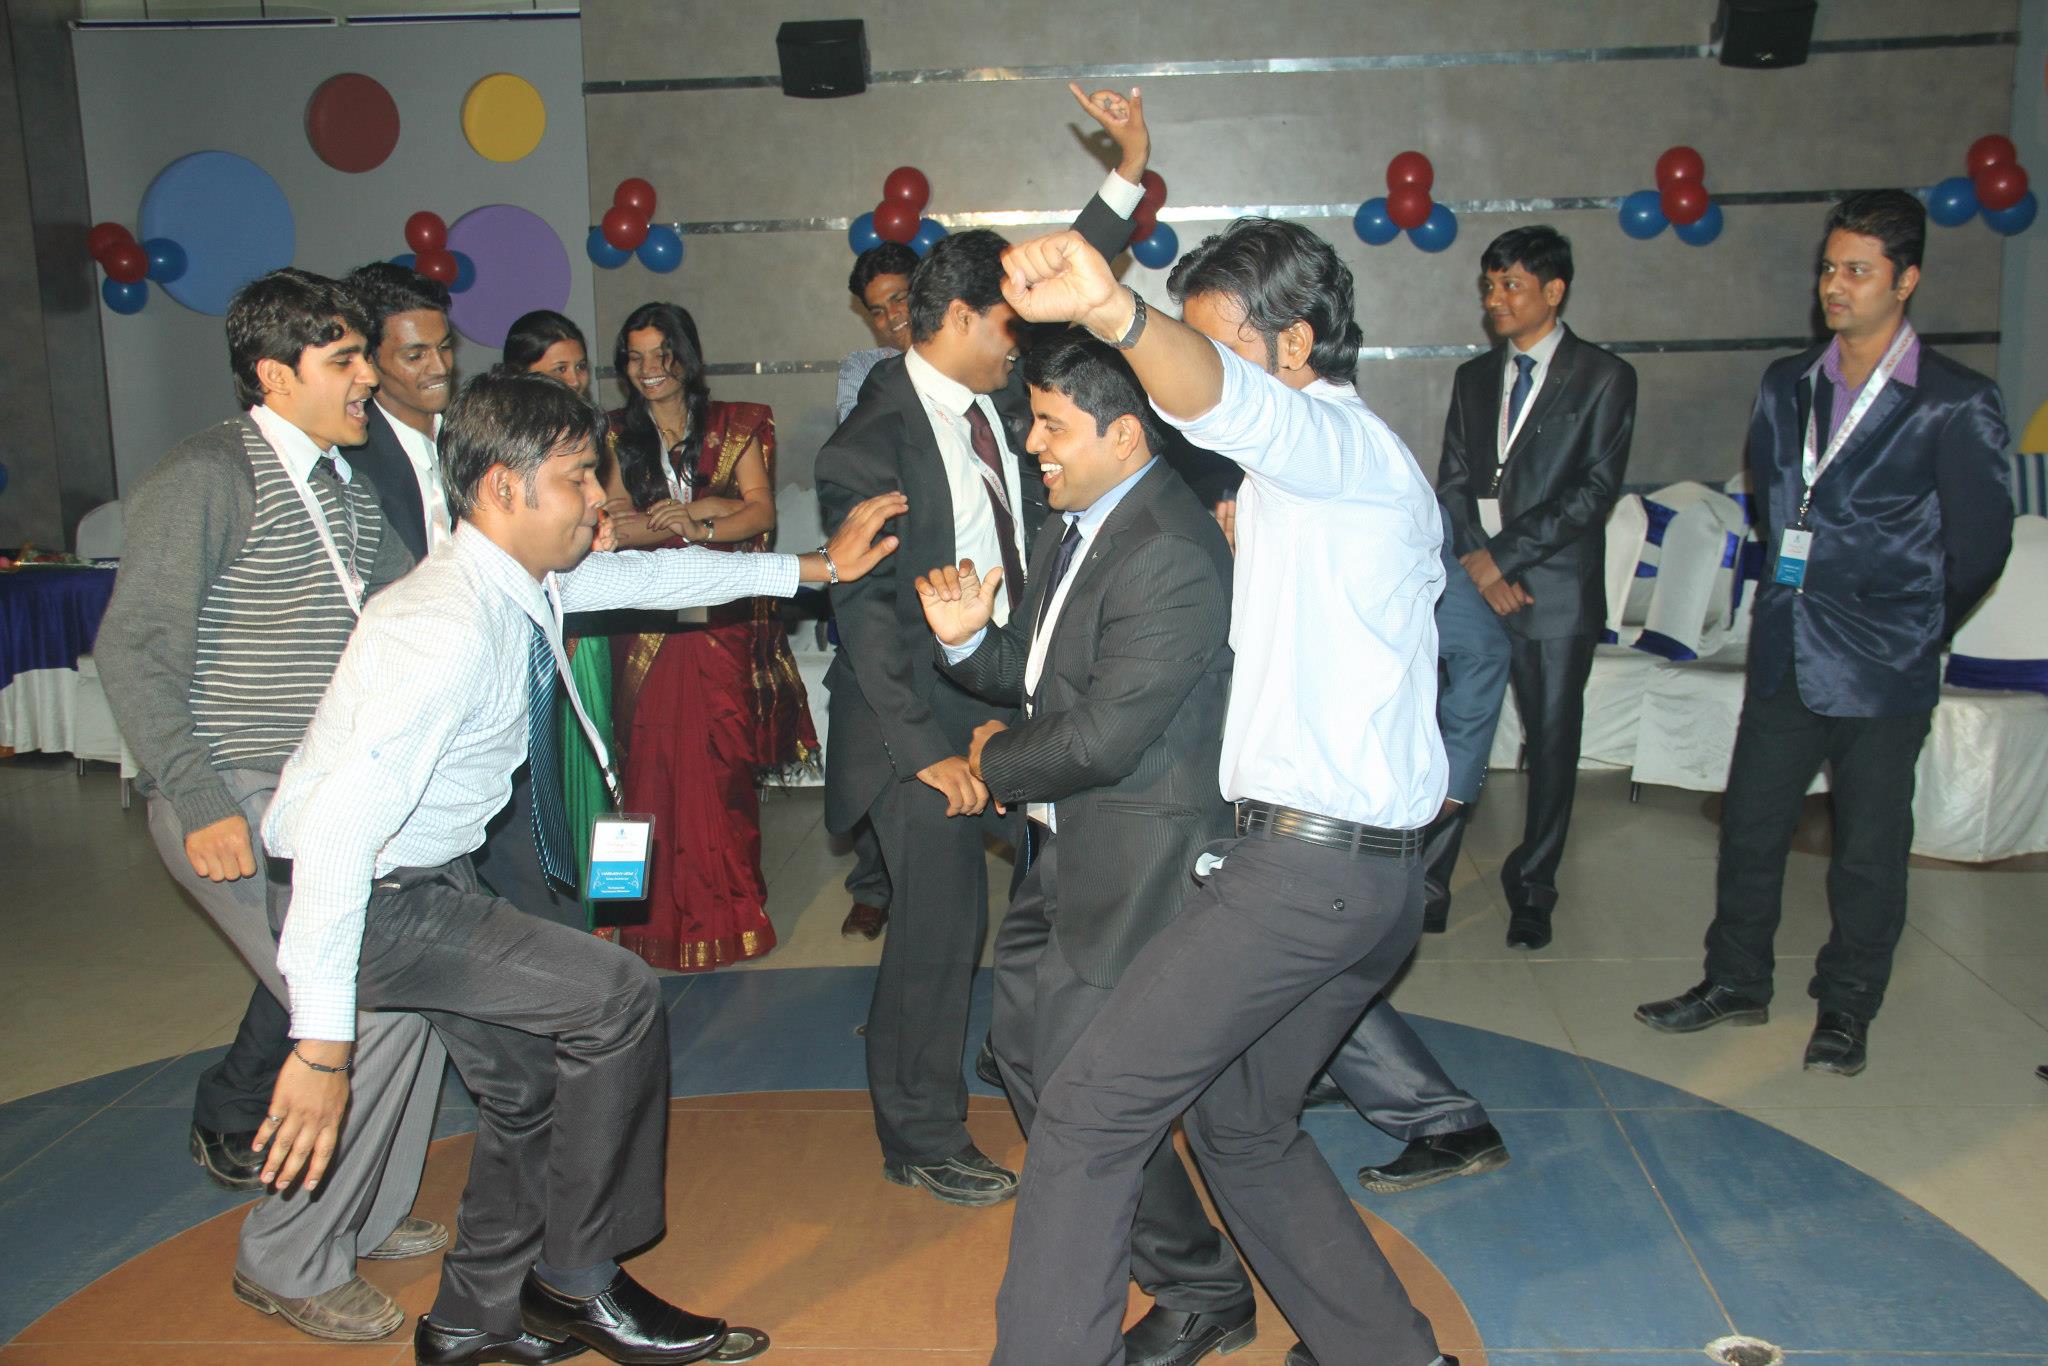 Electrifying Performance by the Employees.